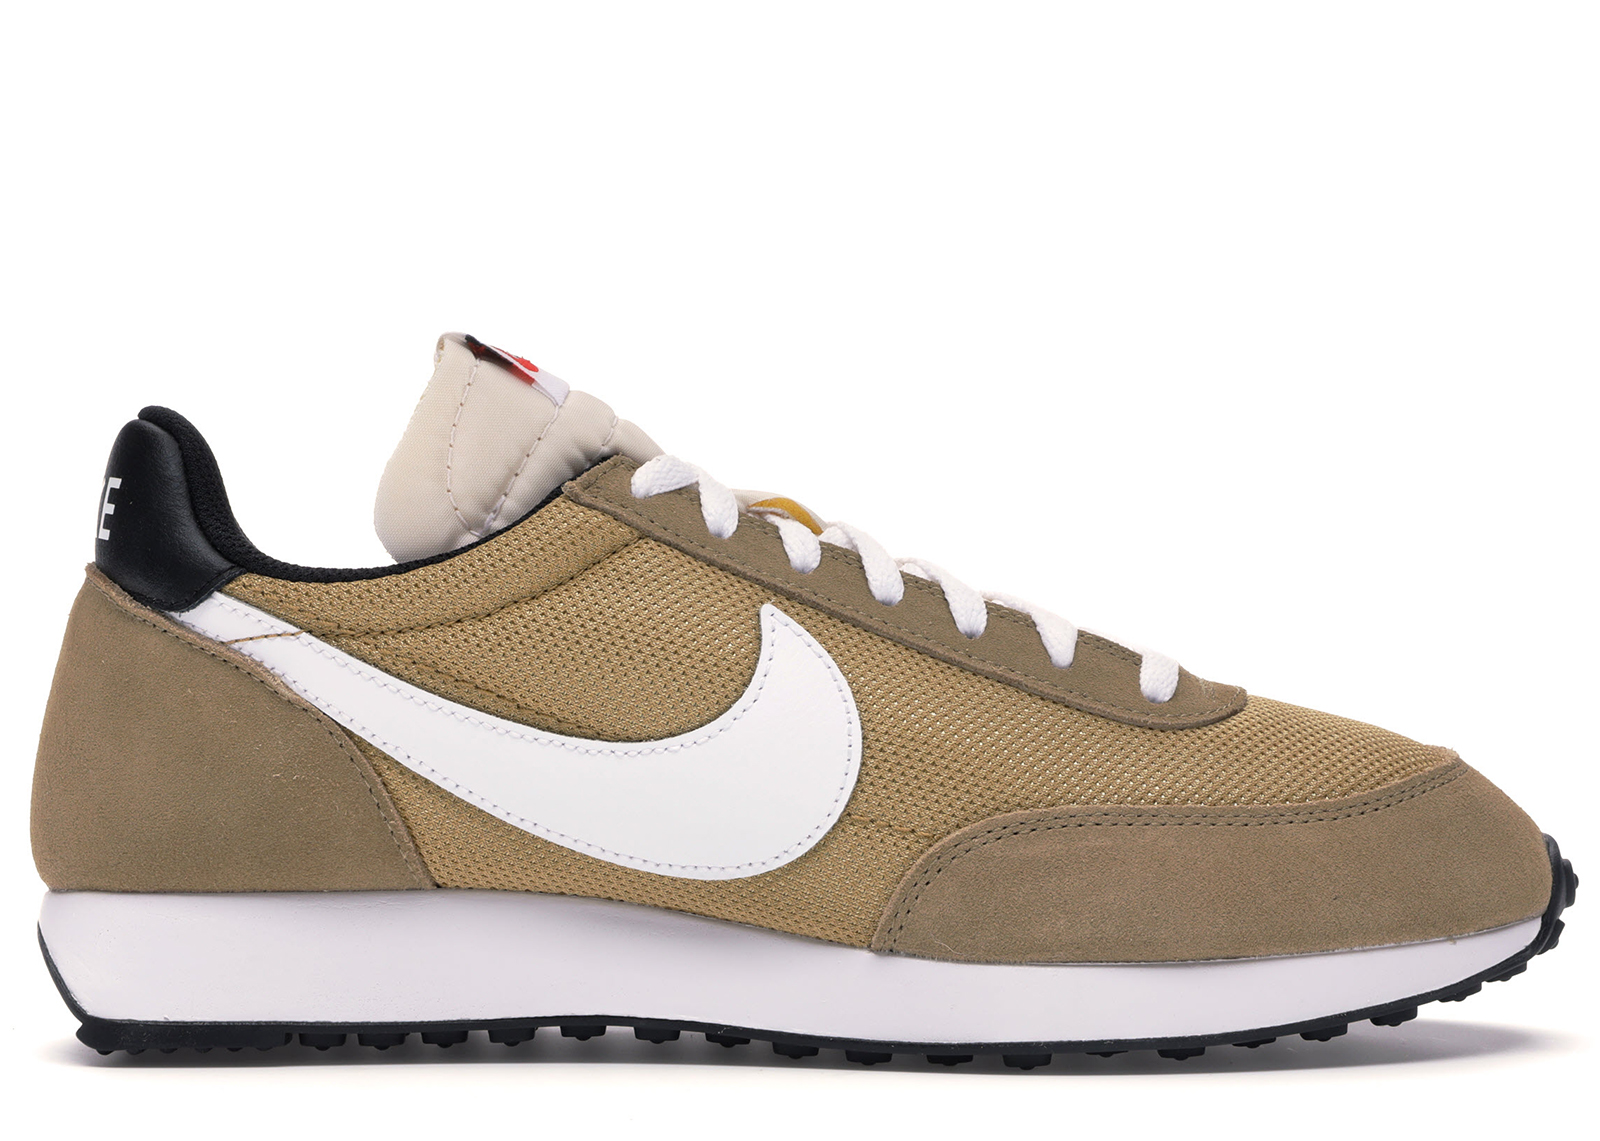 Nike Air Tailwind 79 Sail Track Red